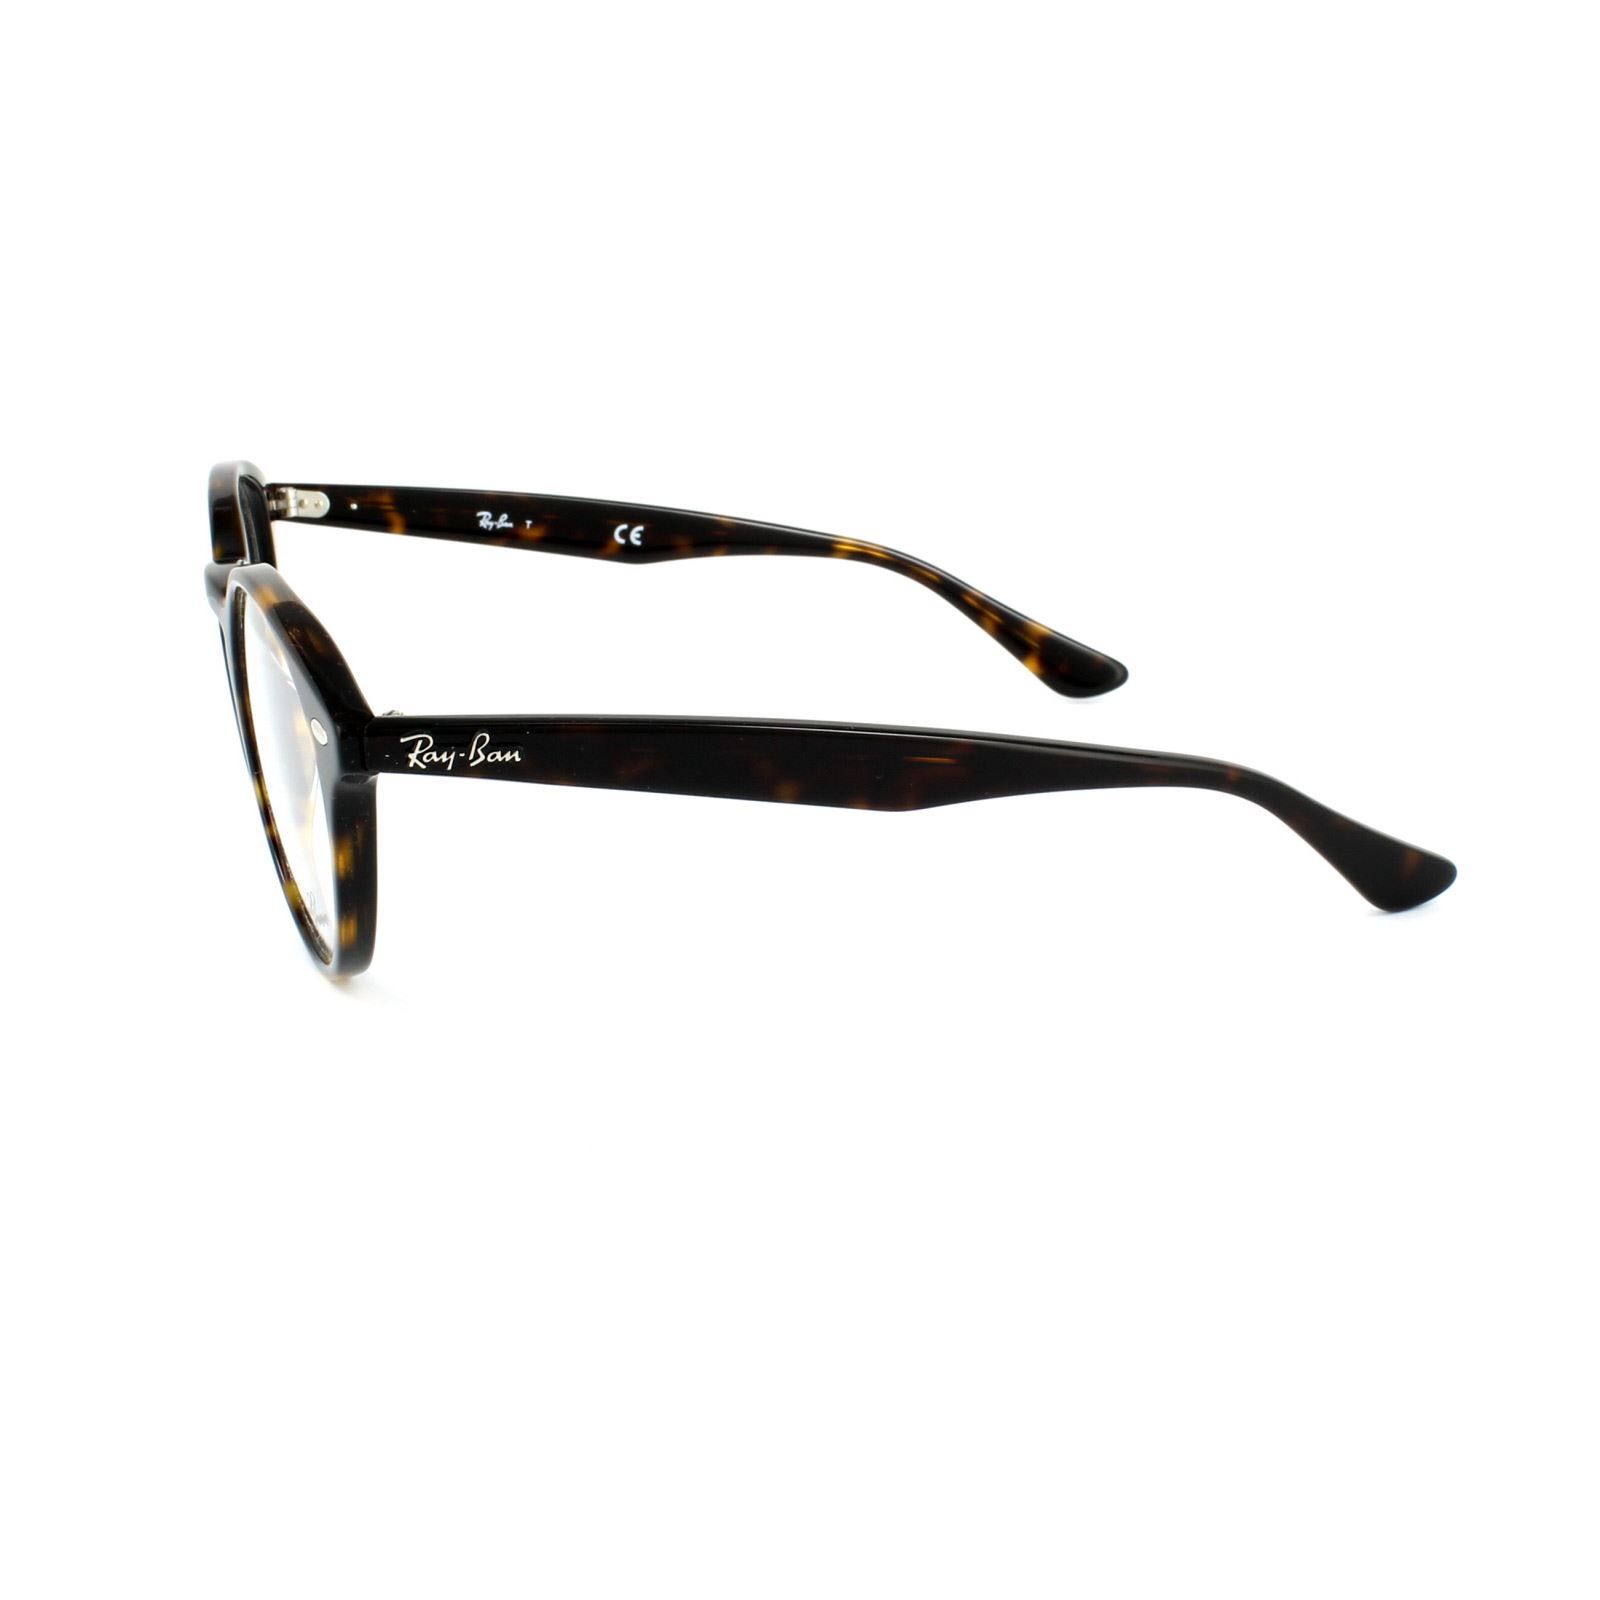 Ray-Ban Glasses Frames 2180V 2012 Dark Havana is a Ray-Ban take on the classic round, which has the typical Ray-Ban diamond shaped rivet front details, wayfarer sleekly shaped arms and silver Ray-Ban logo. The round shape is hugely popular and bang on trend again!